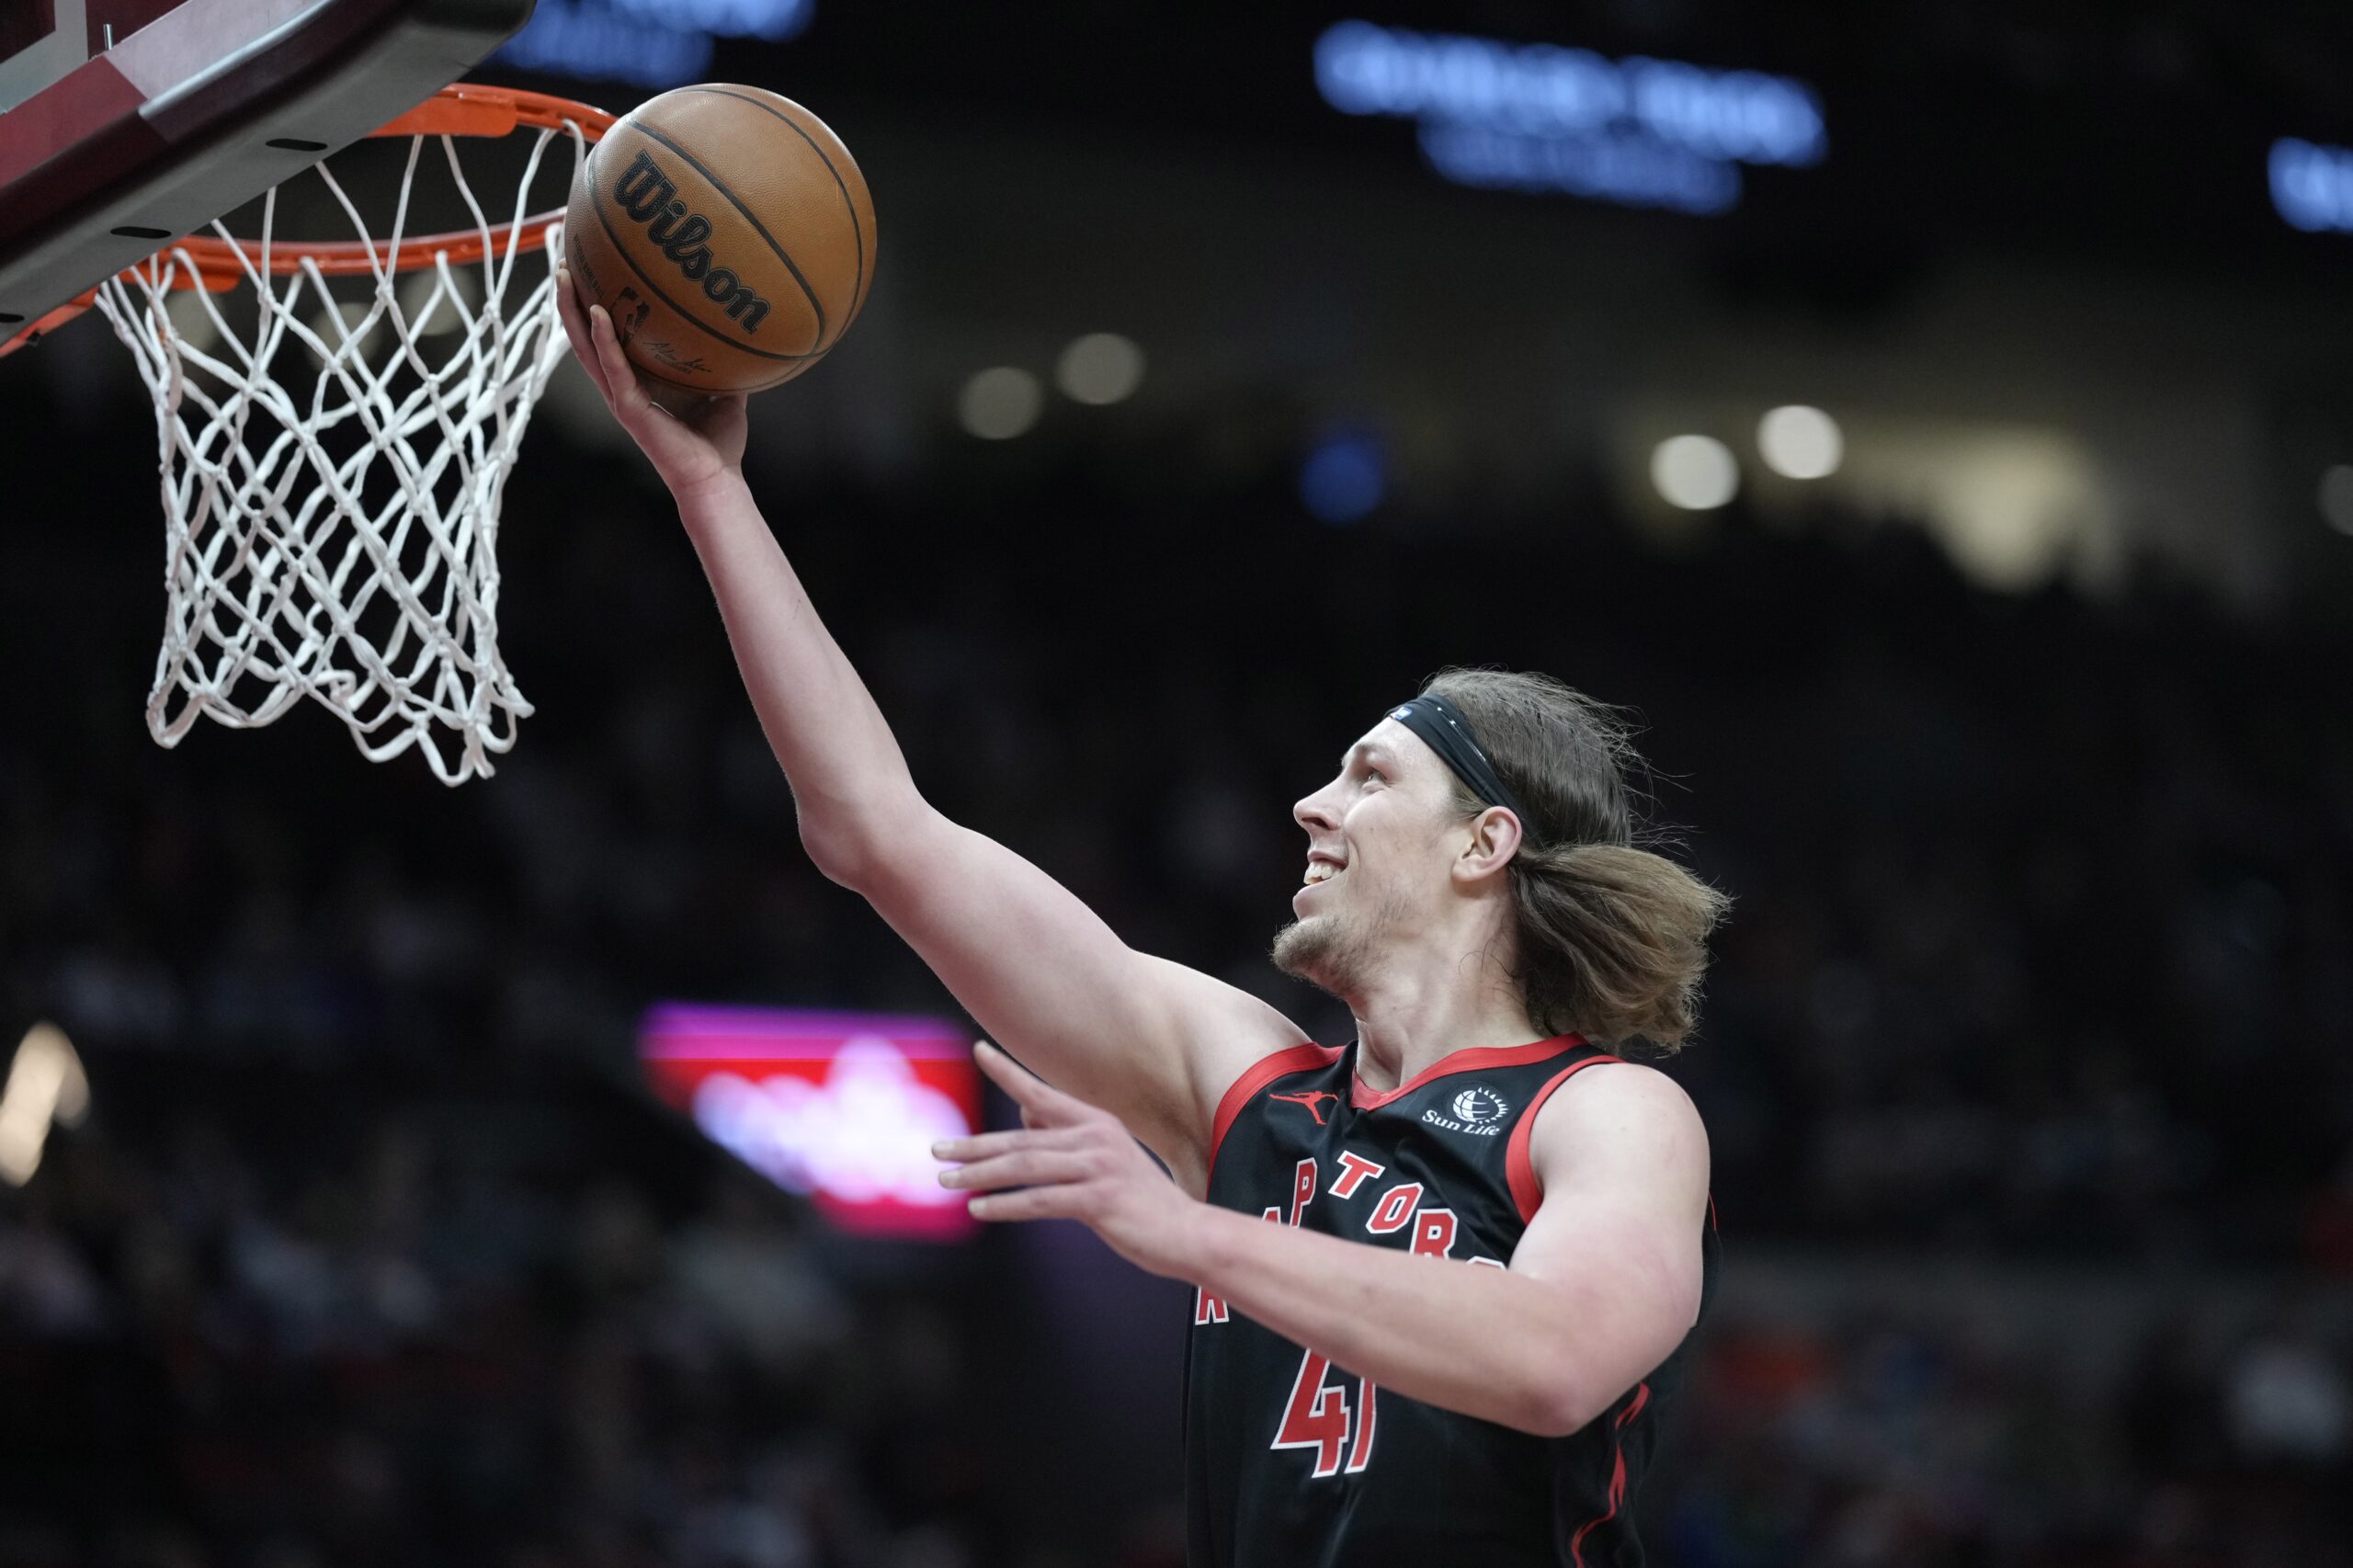 Toronto Raptors power forward Kelly Olynyk (41) shoots the ball during the first half against the Portland Trail Blazers at Moda Center.